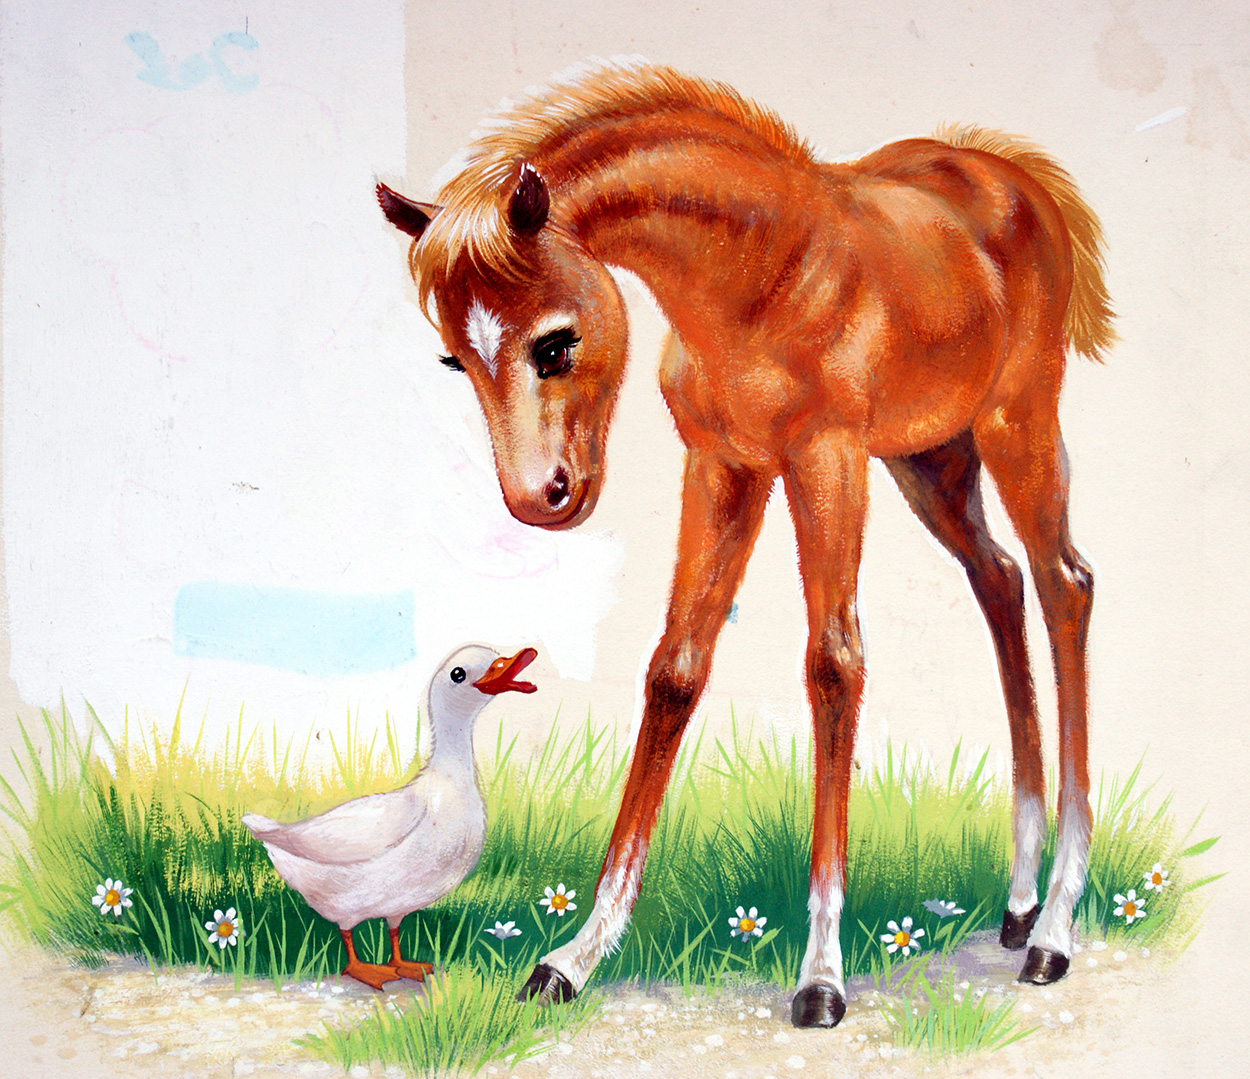 The Best of Friends - Foal and Duckling (Original) art by Nursery (William Francis Phillipps) at The Illustration Art Gallery